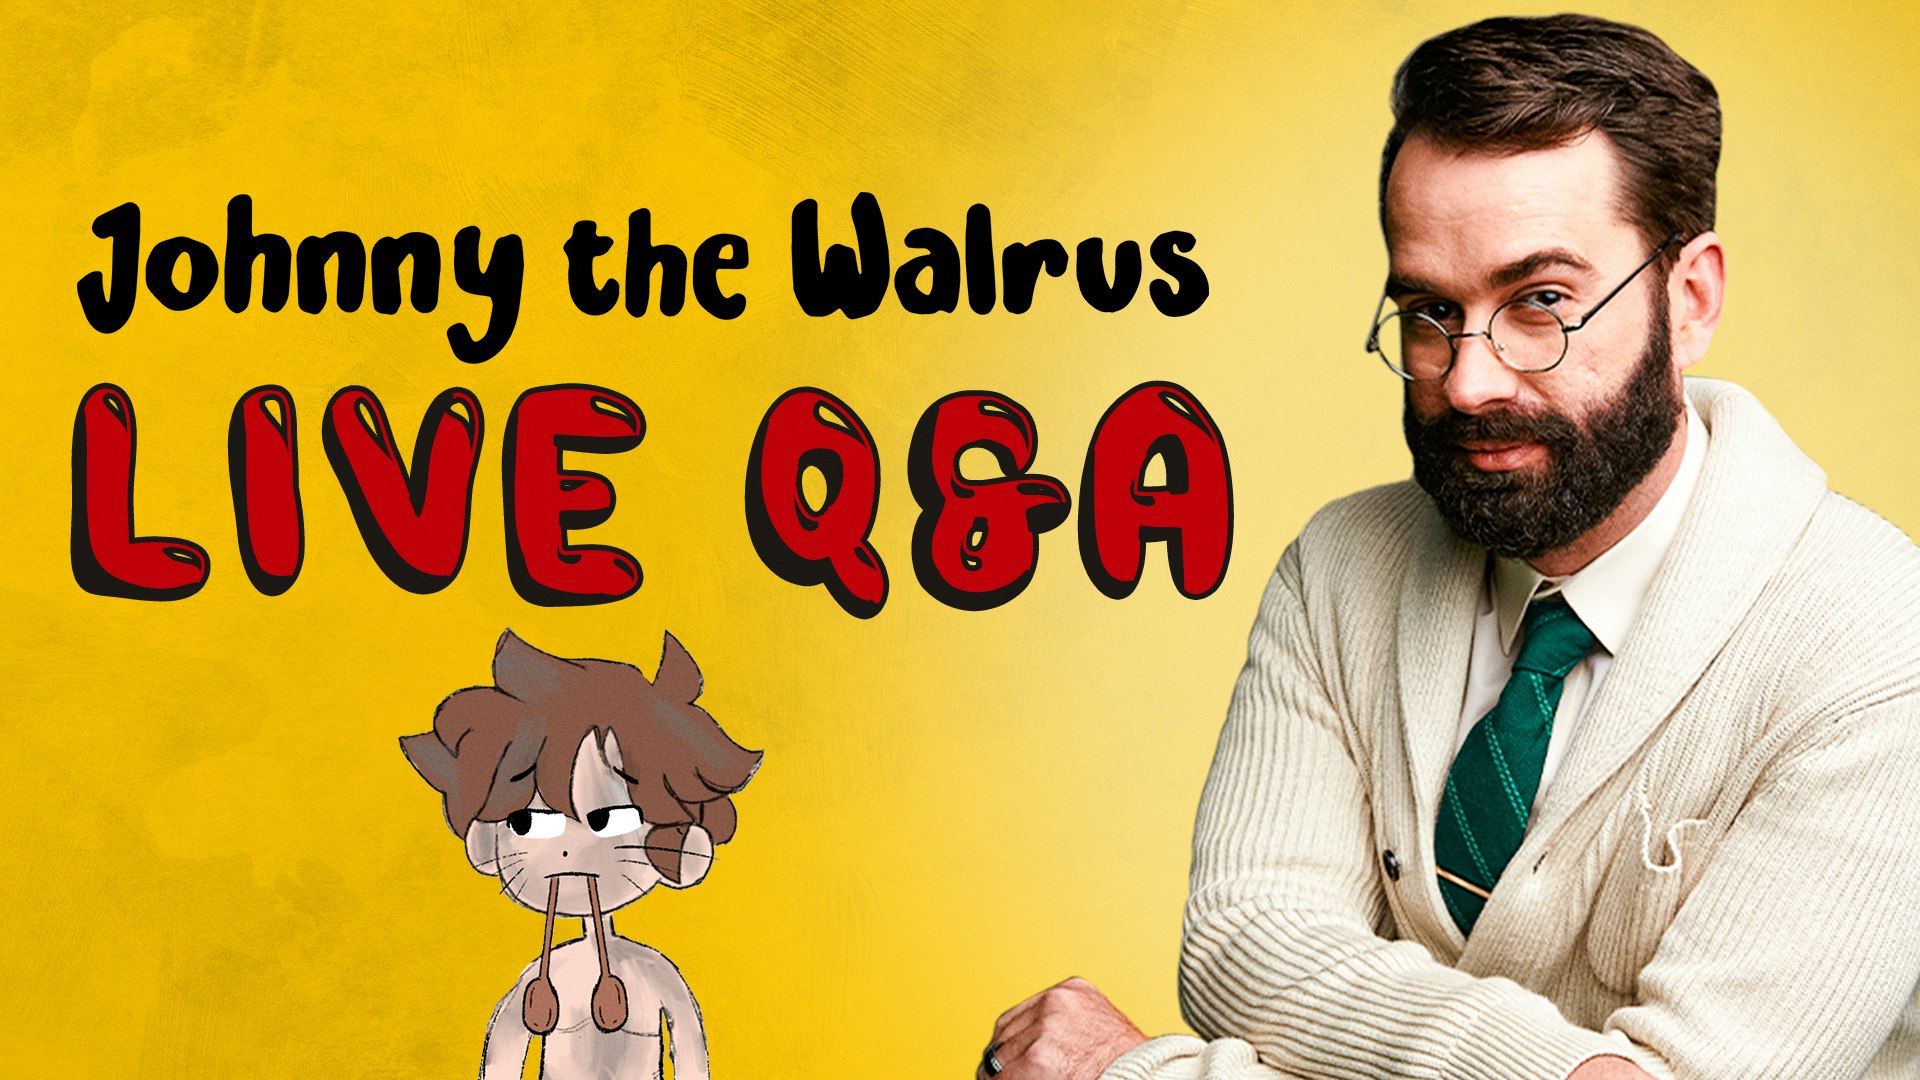 America’s #1 Best-Selling Children’s Author Answers YOUR Questions